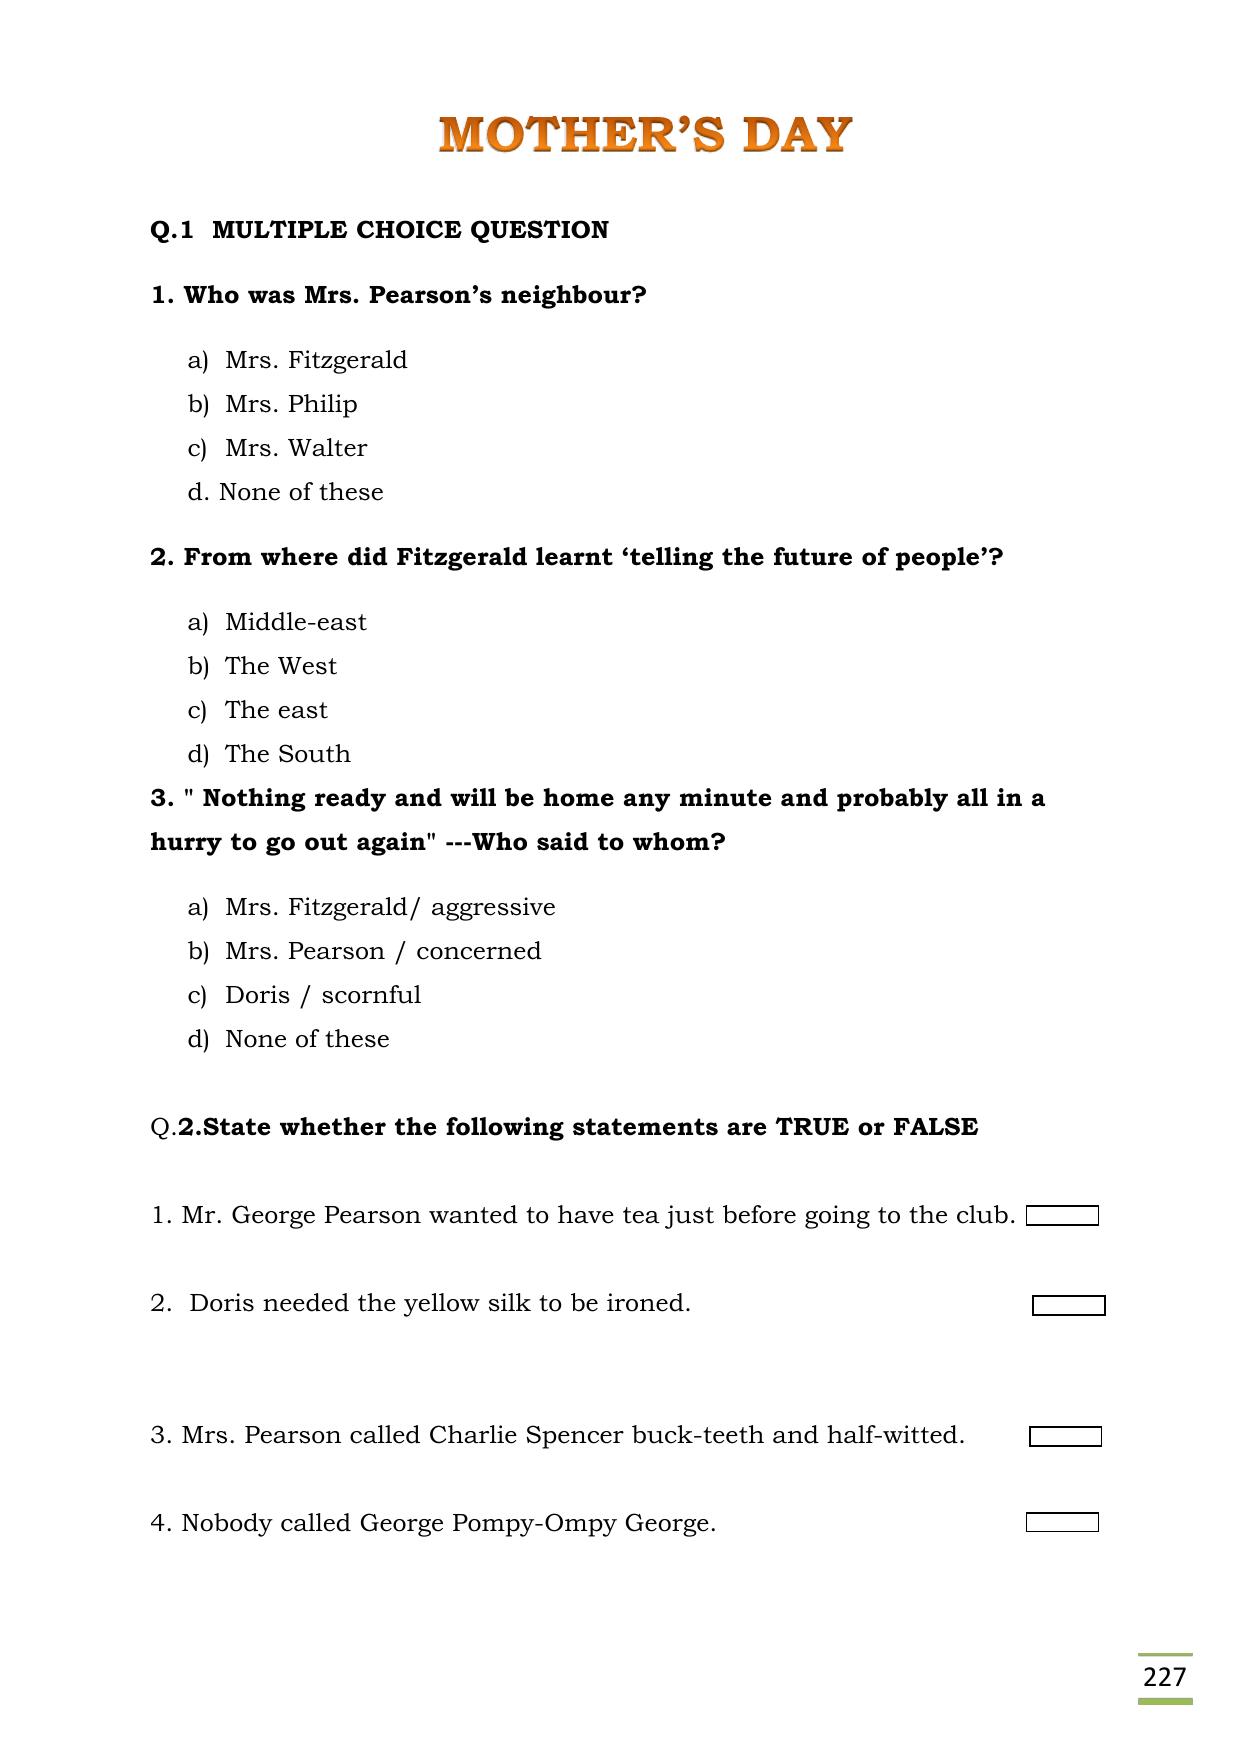 CBSE Worksheets for Class 11 English Mothers day questions answers - Page 1